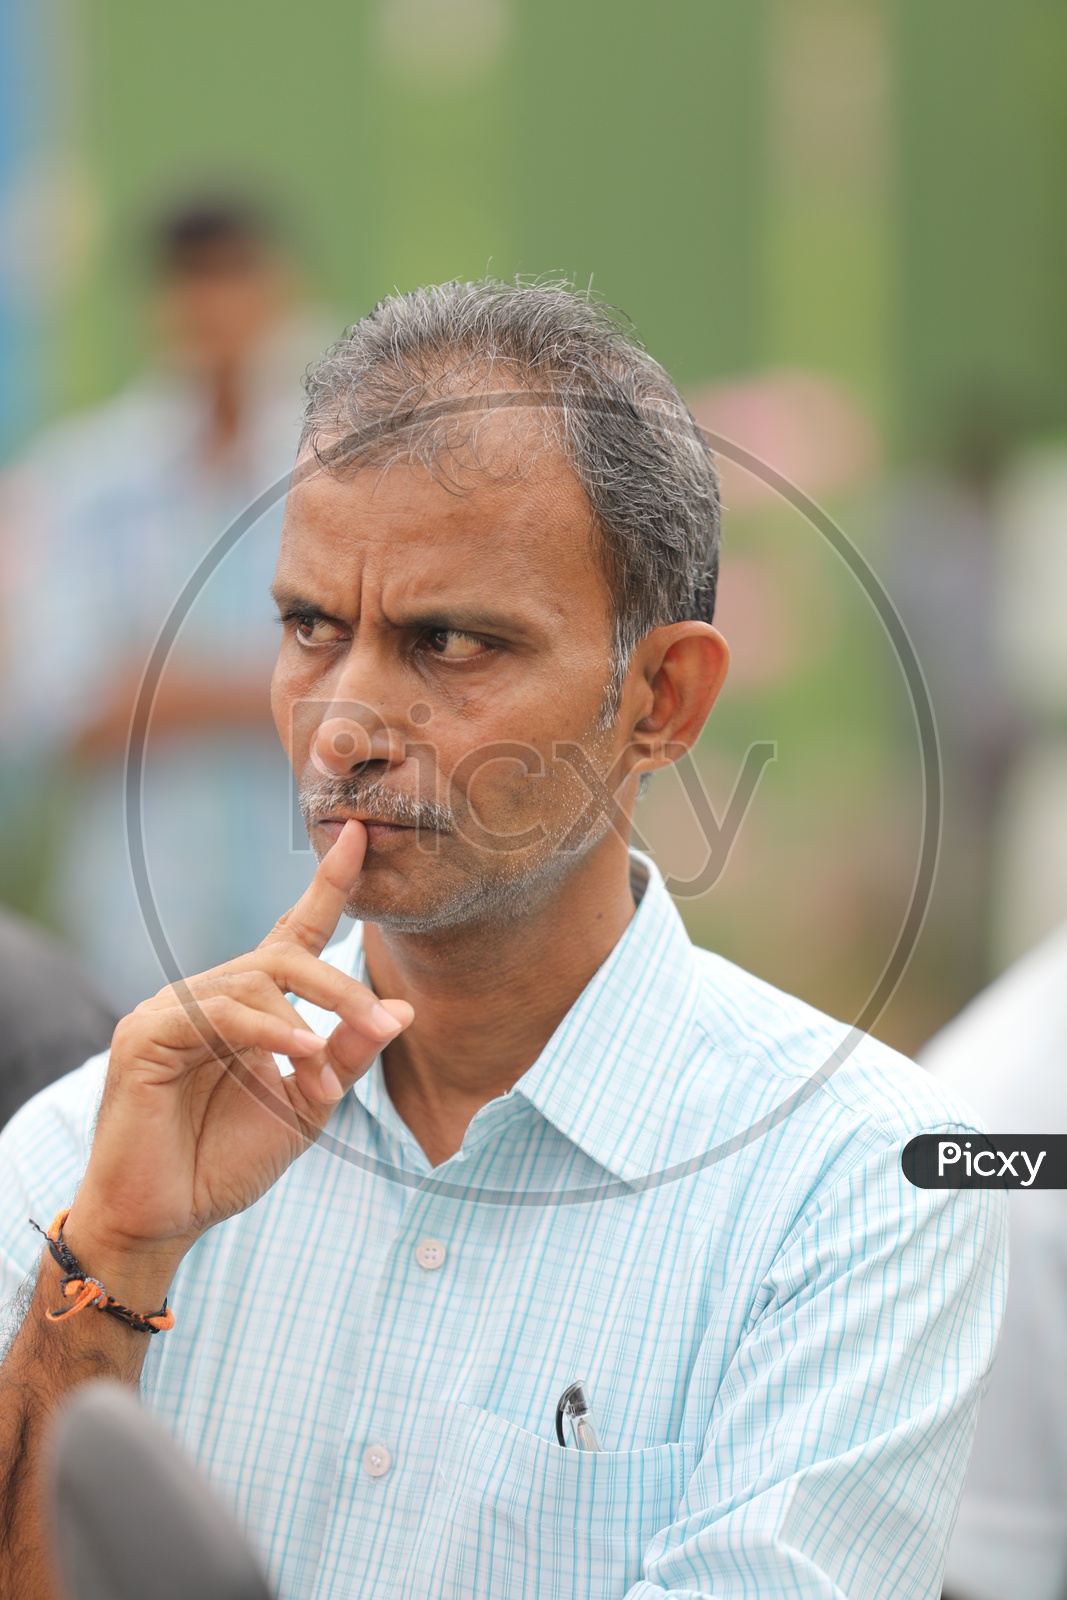 Indian Man With an Expression